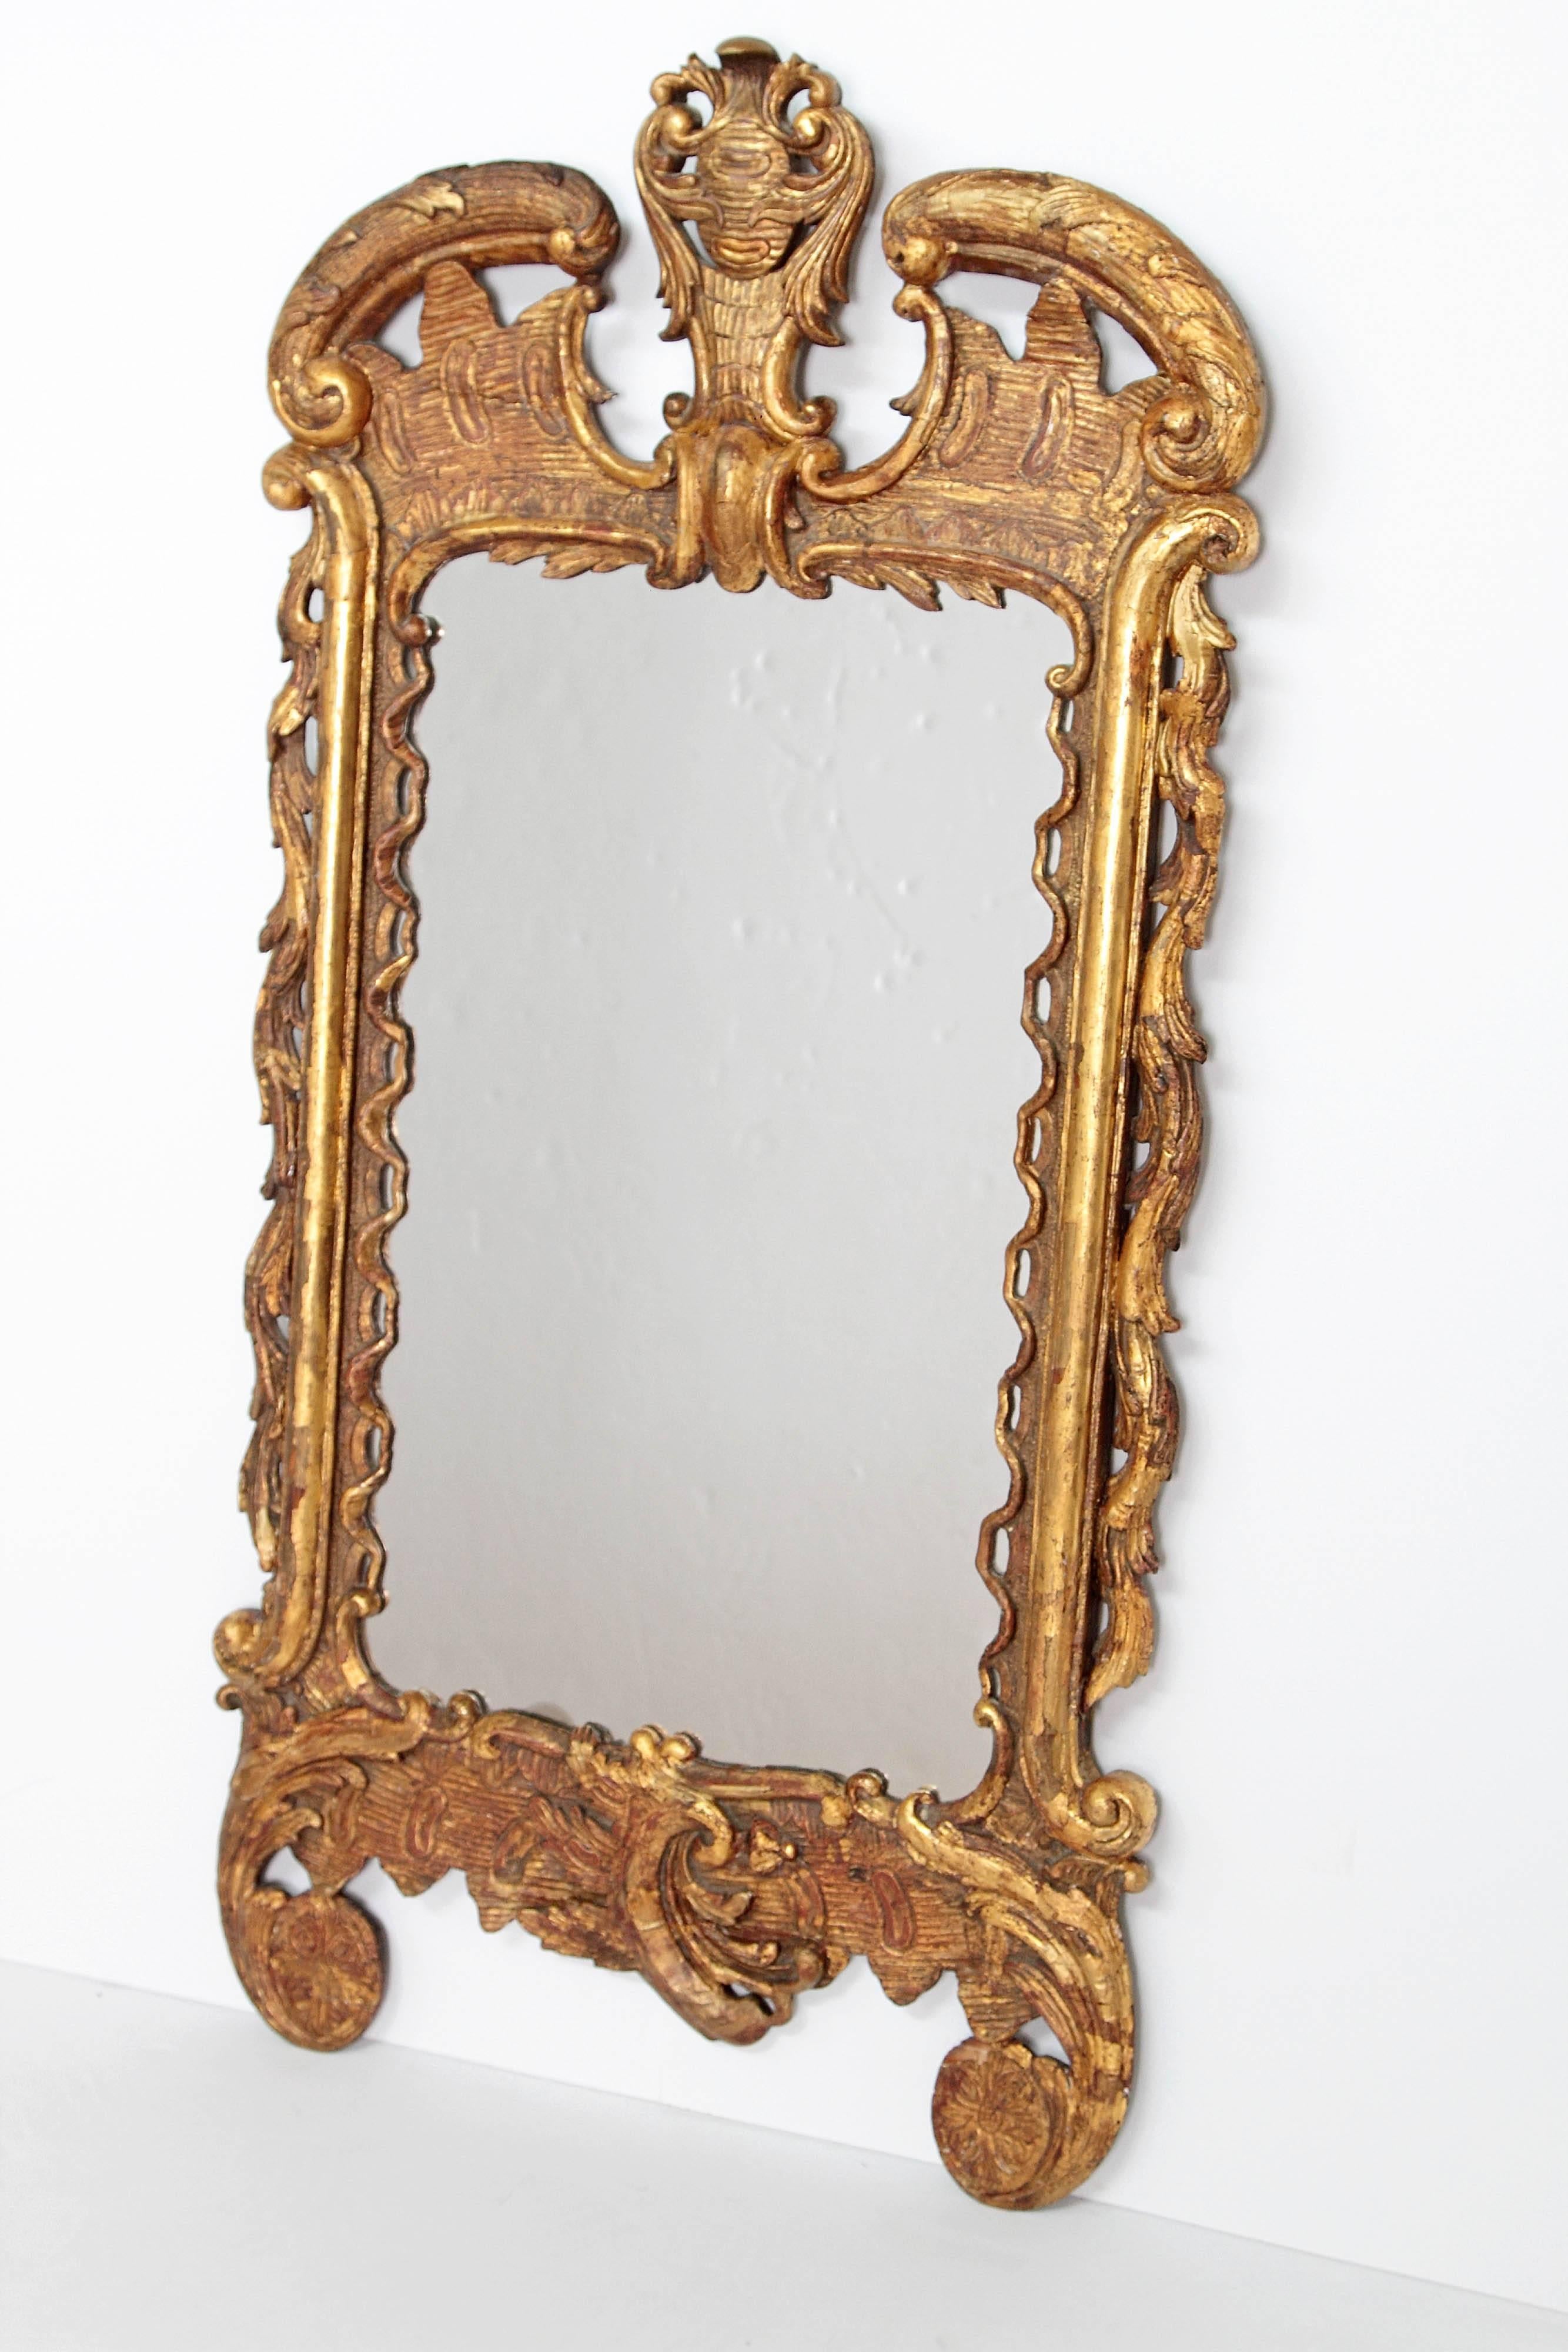 English Period George III Pier Glass with Carved and Gilded Frame